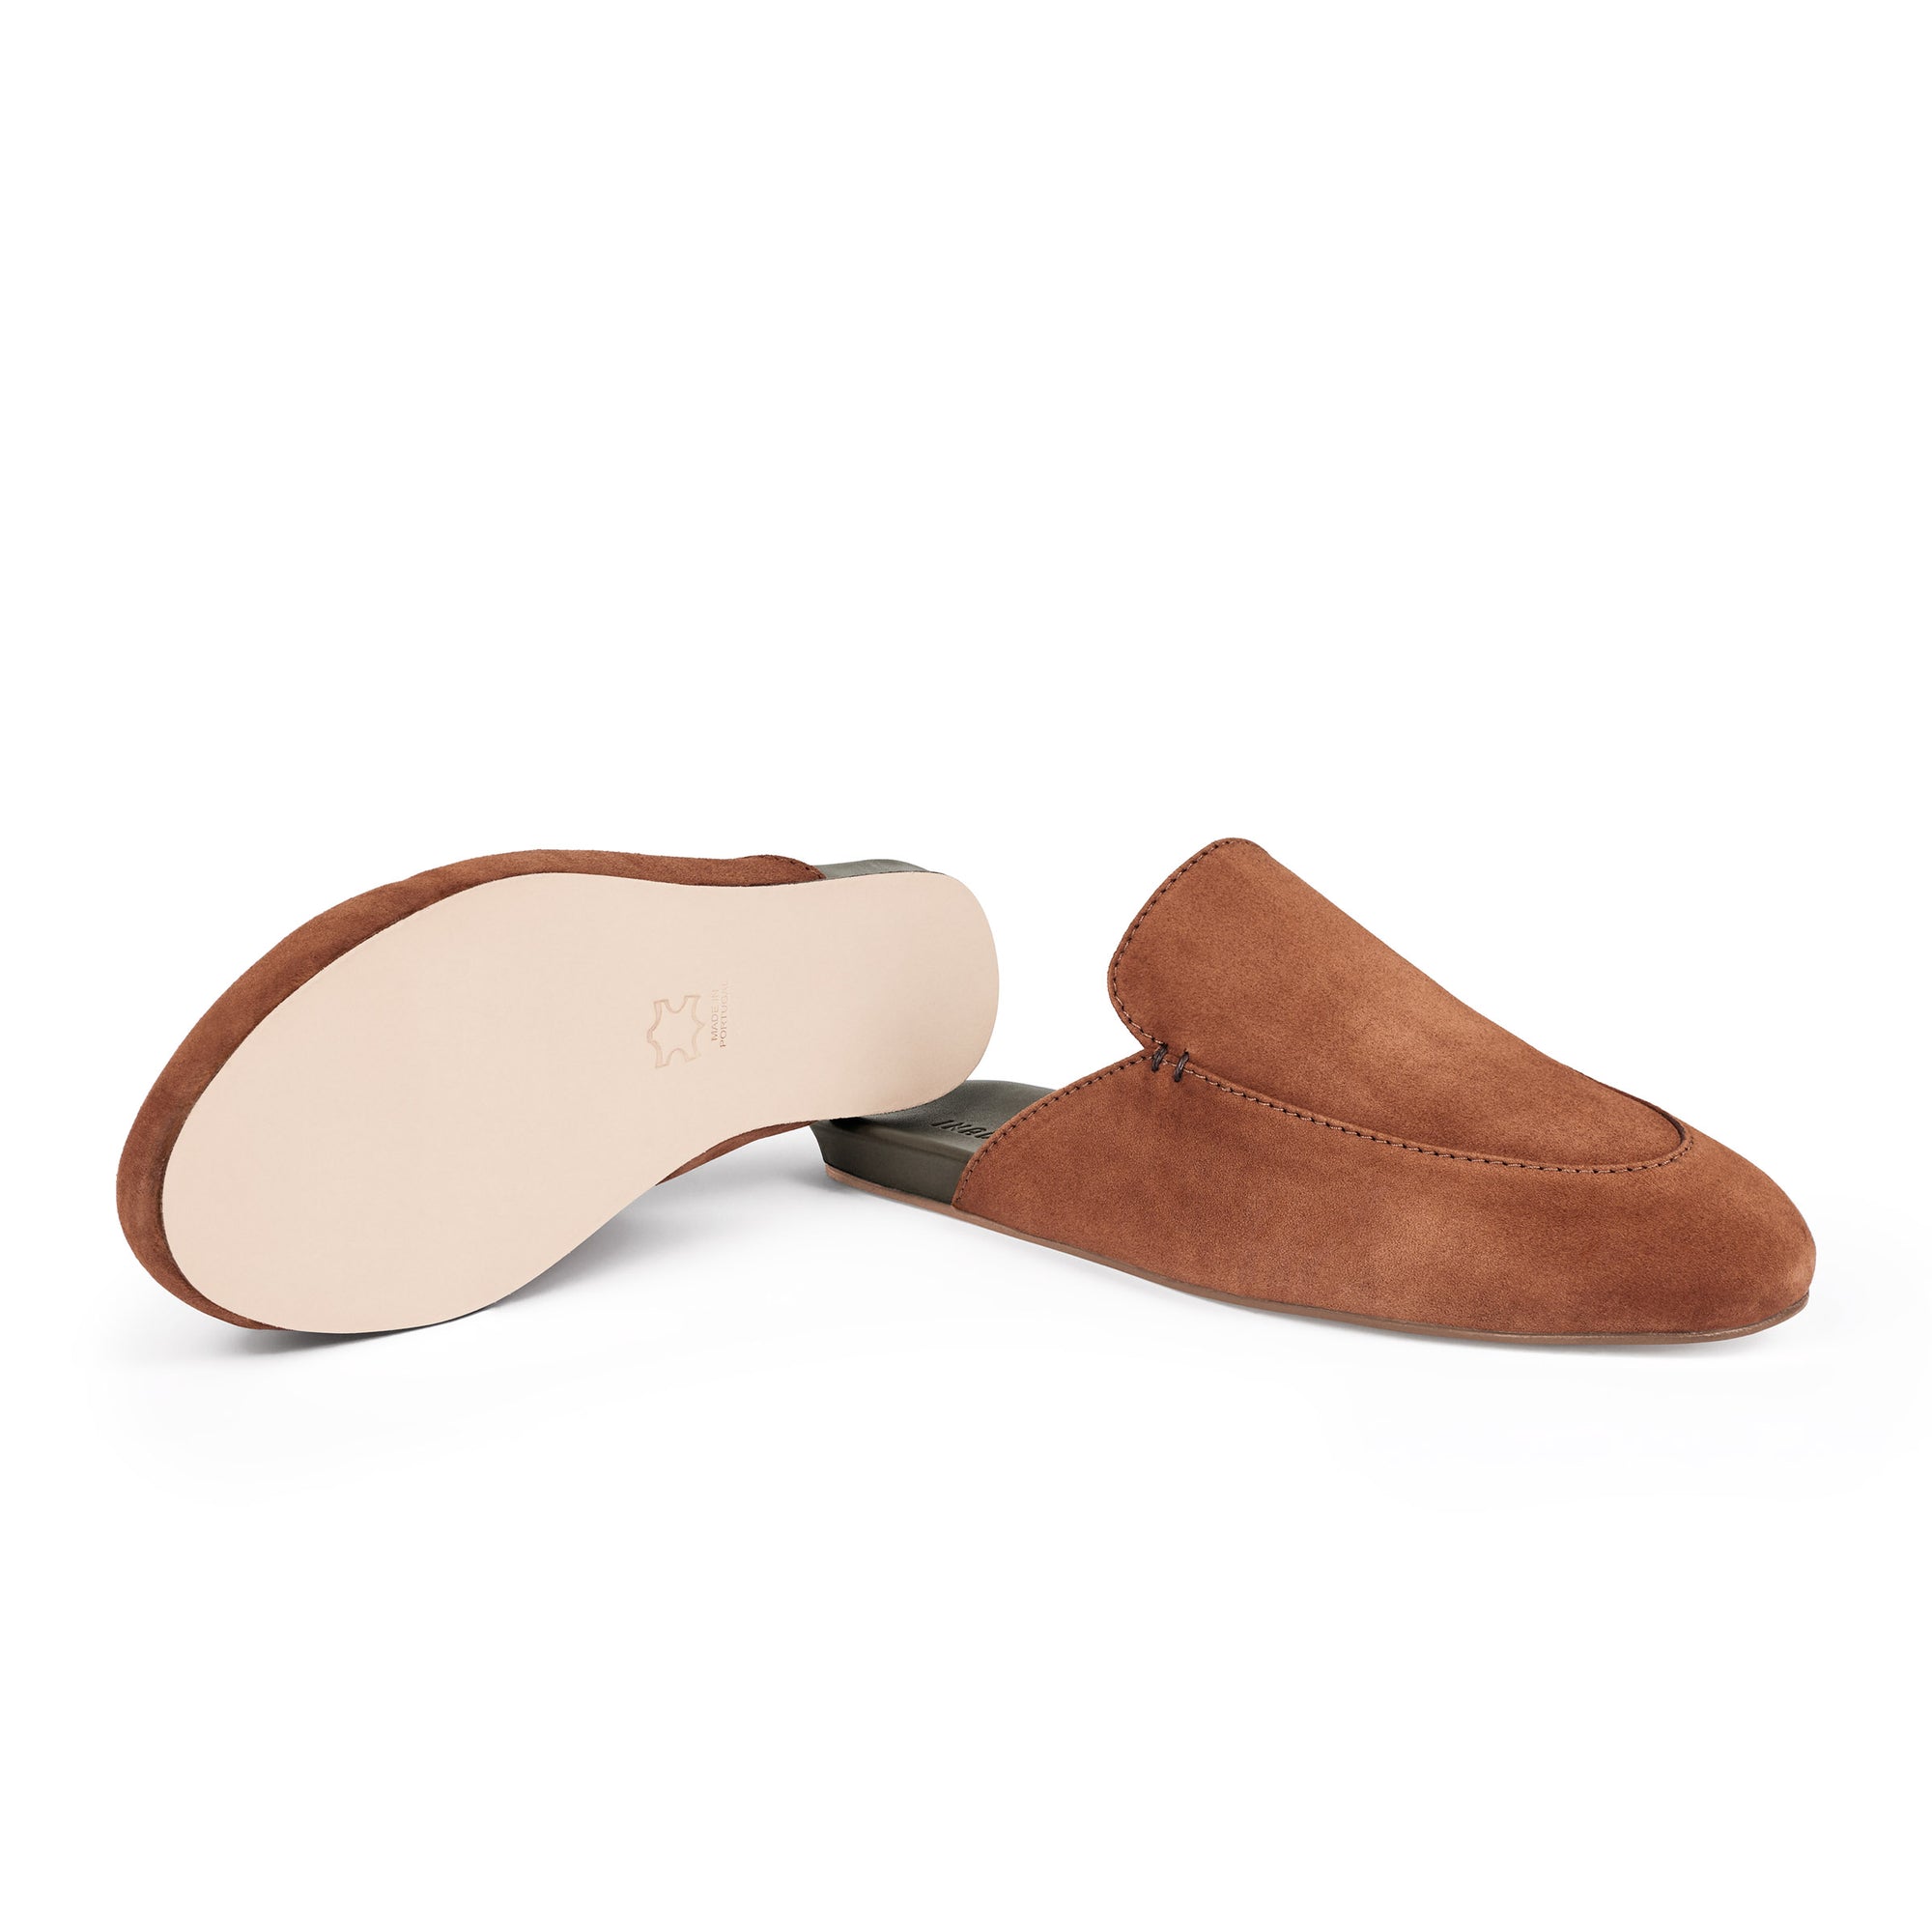 Inabo Men's Slowfer slipper in brown suede showing a leather outer sole 